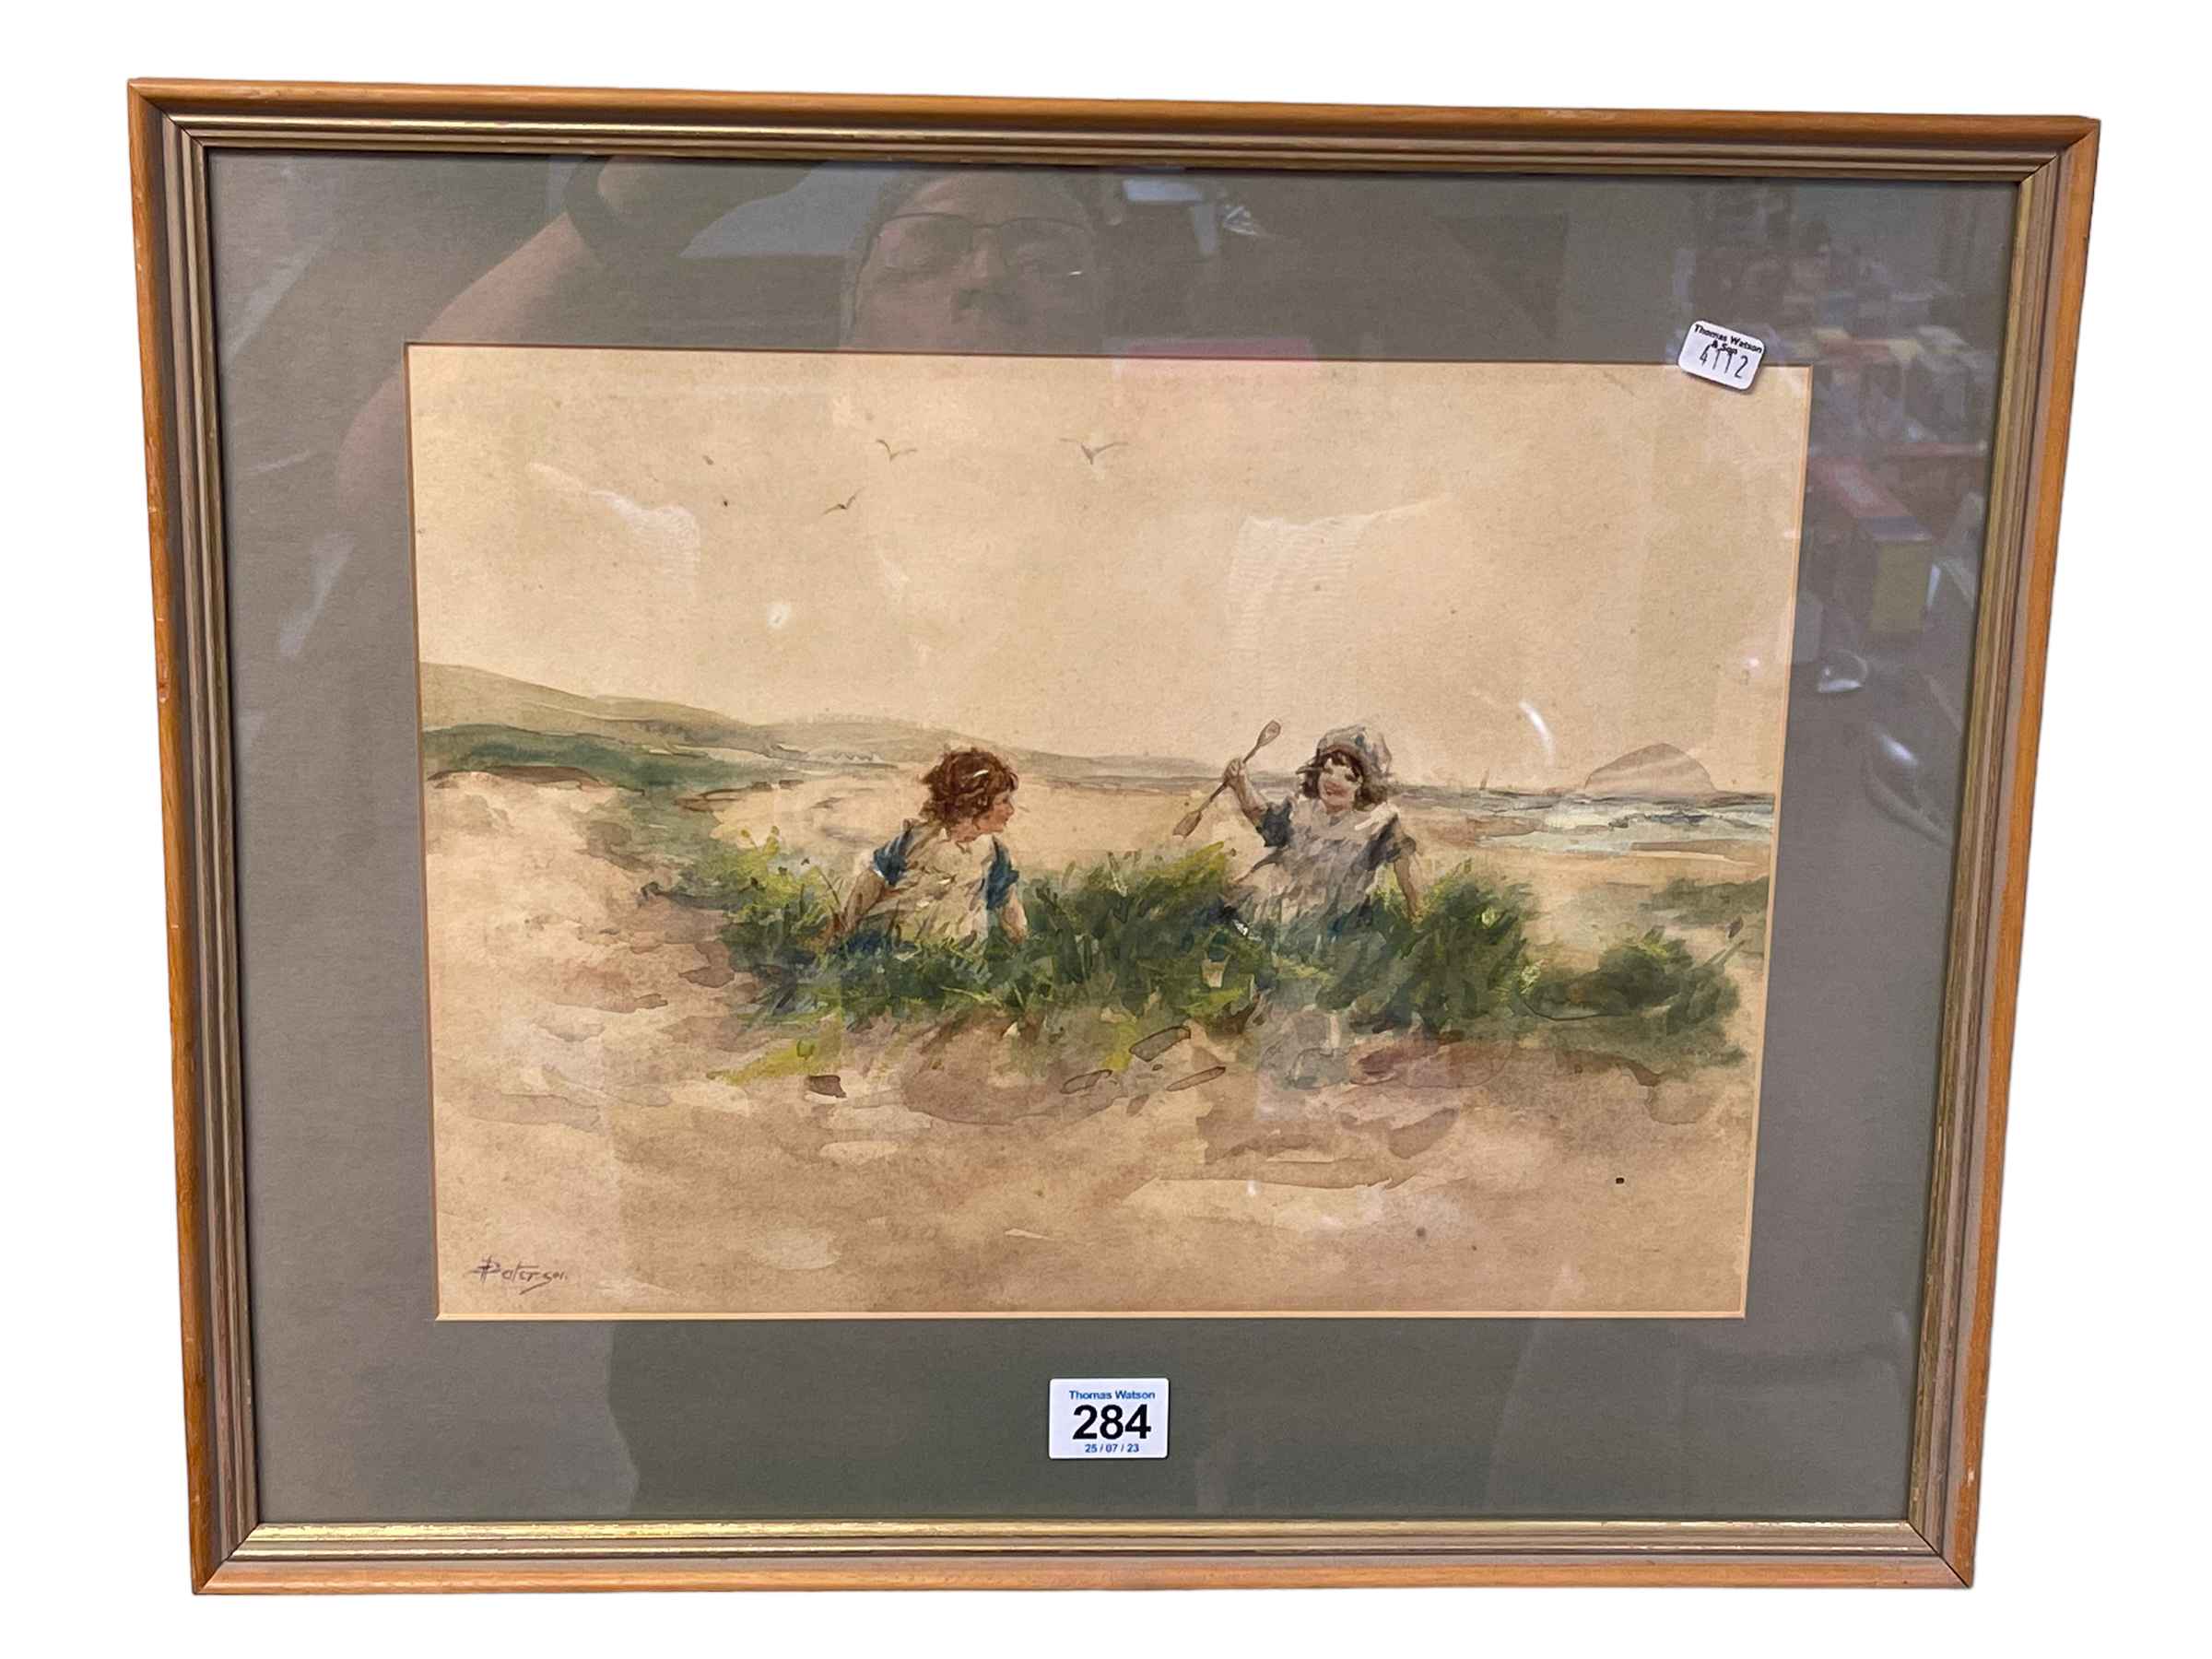 James Paterson, Children Playing on a Beach, watercolour, signed lower left, 24.